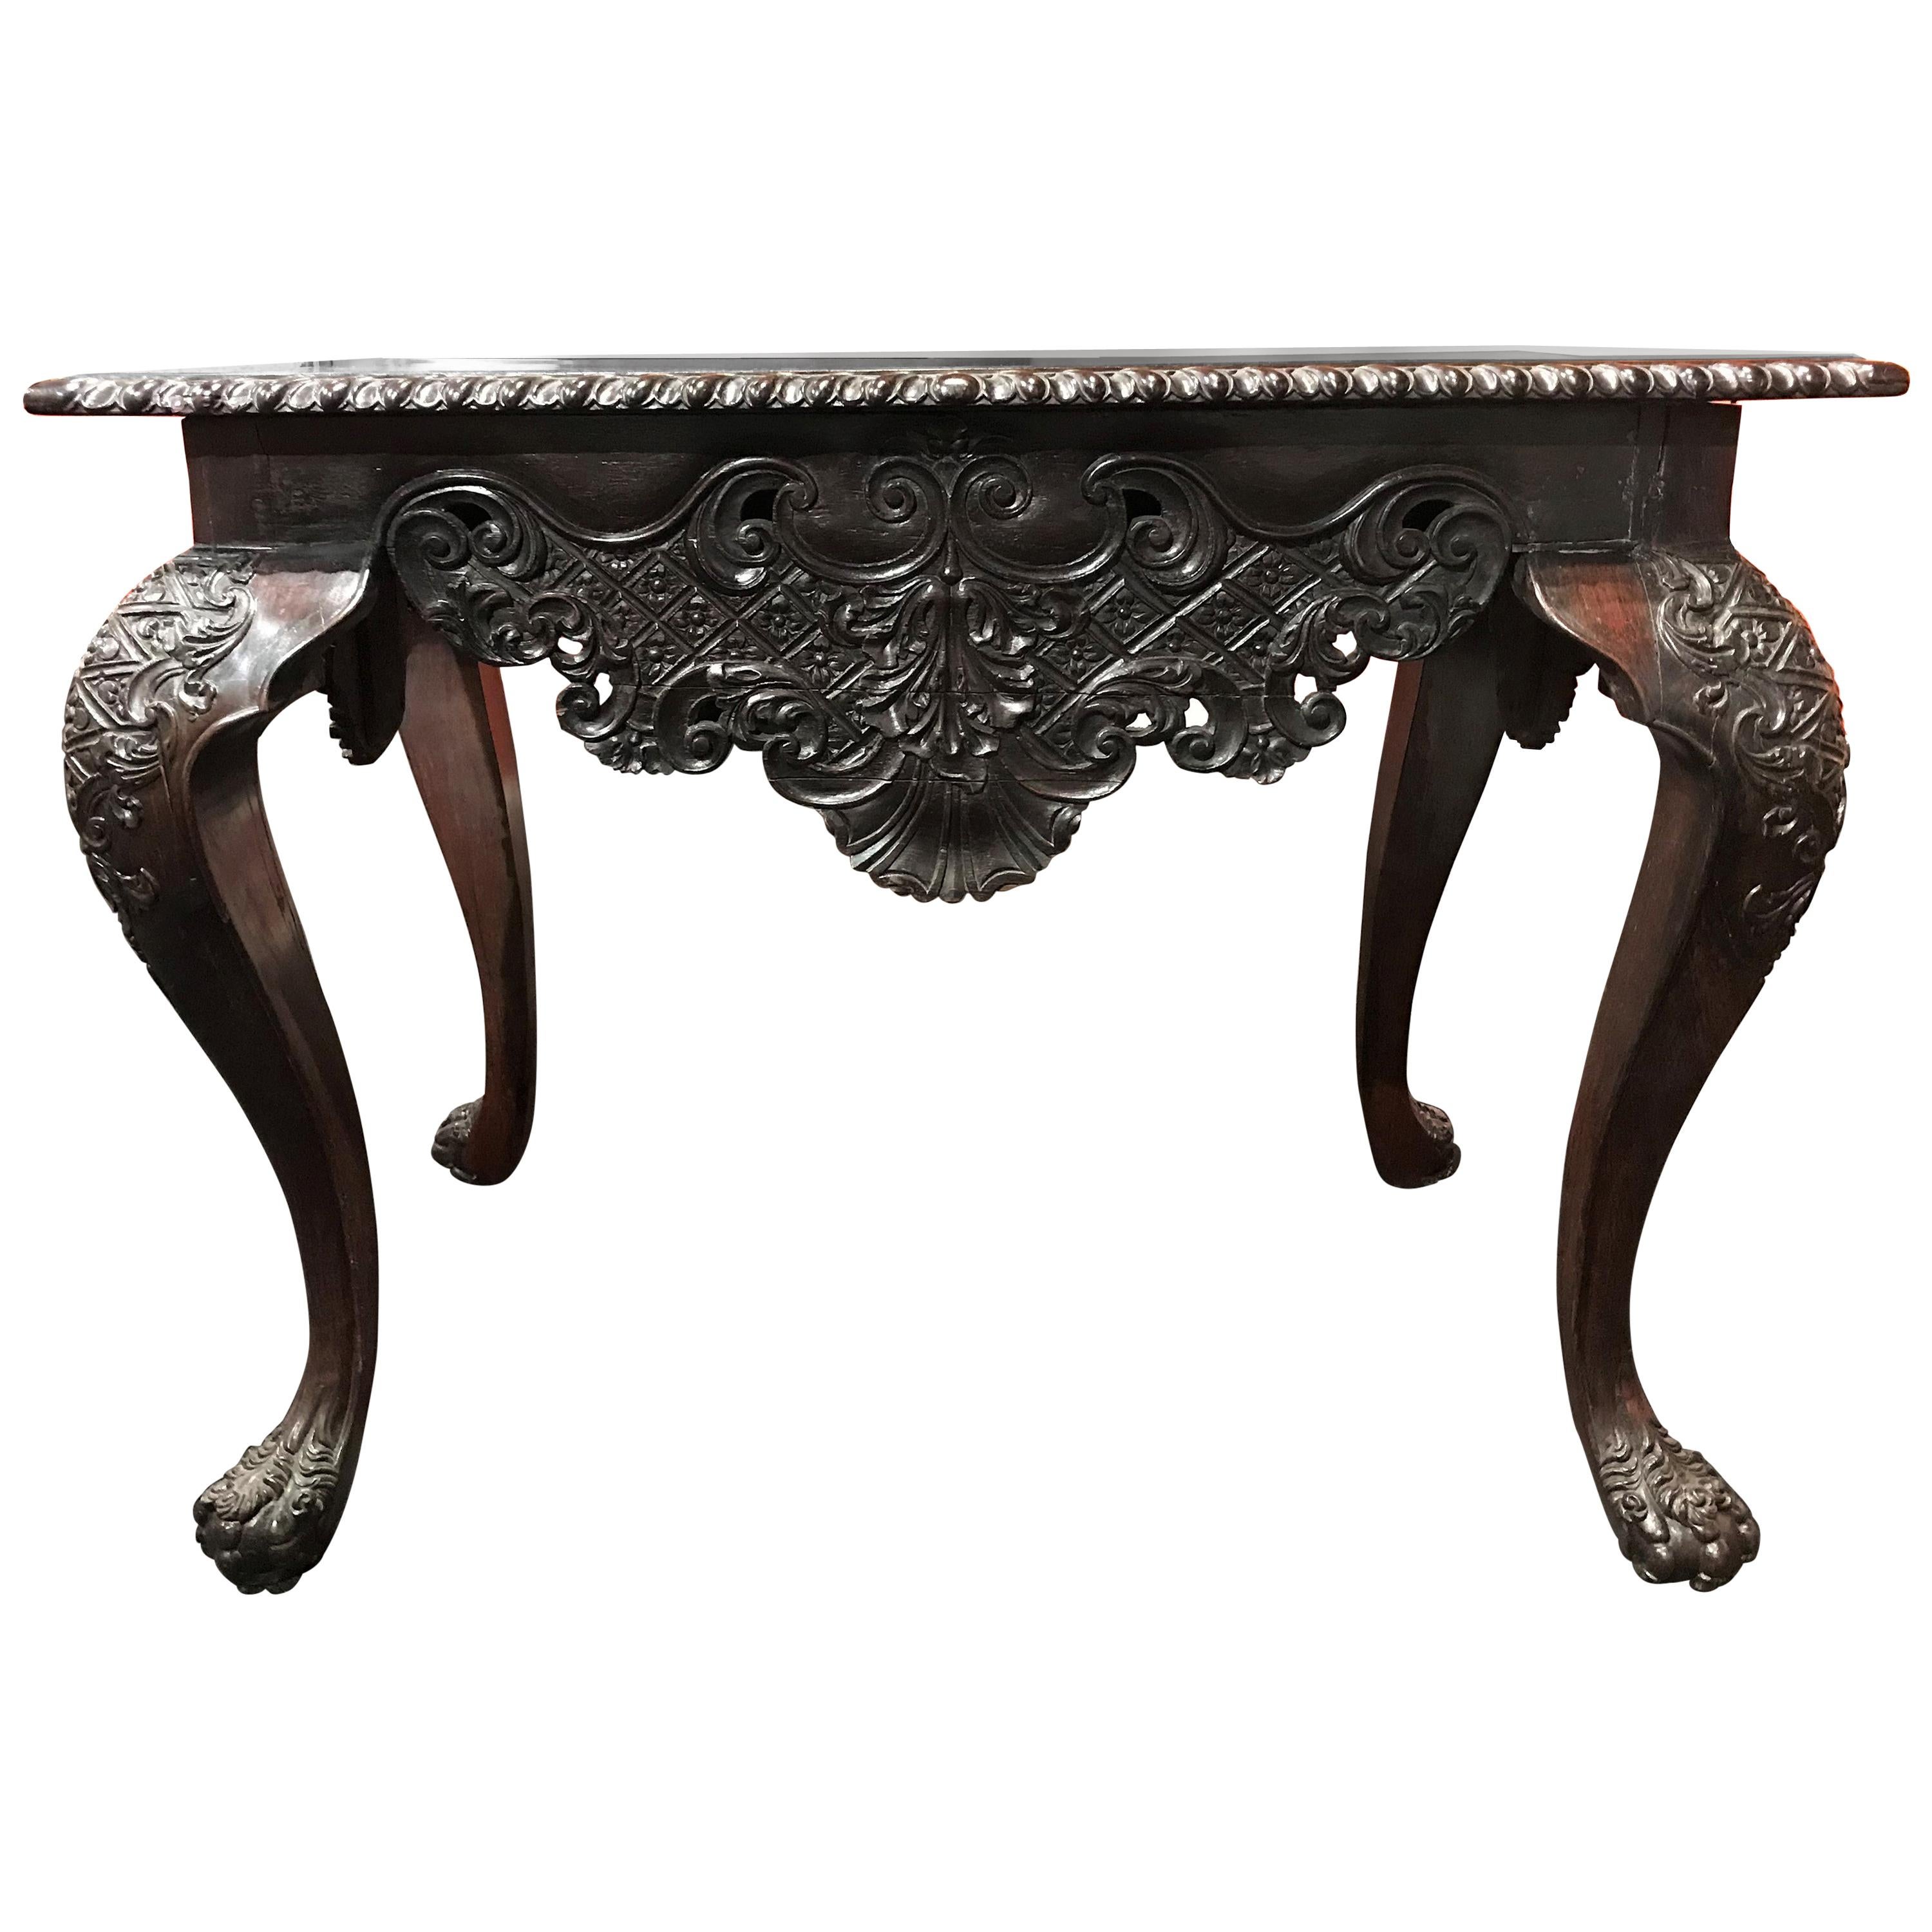 18th-19th Century Exceptionally Carved Portuguese Rococo Rosewood Center Table